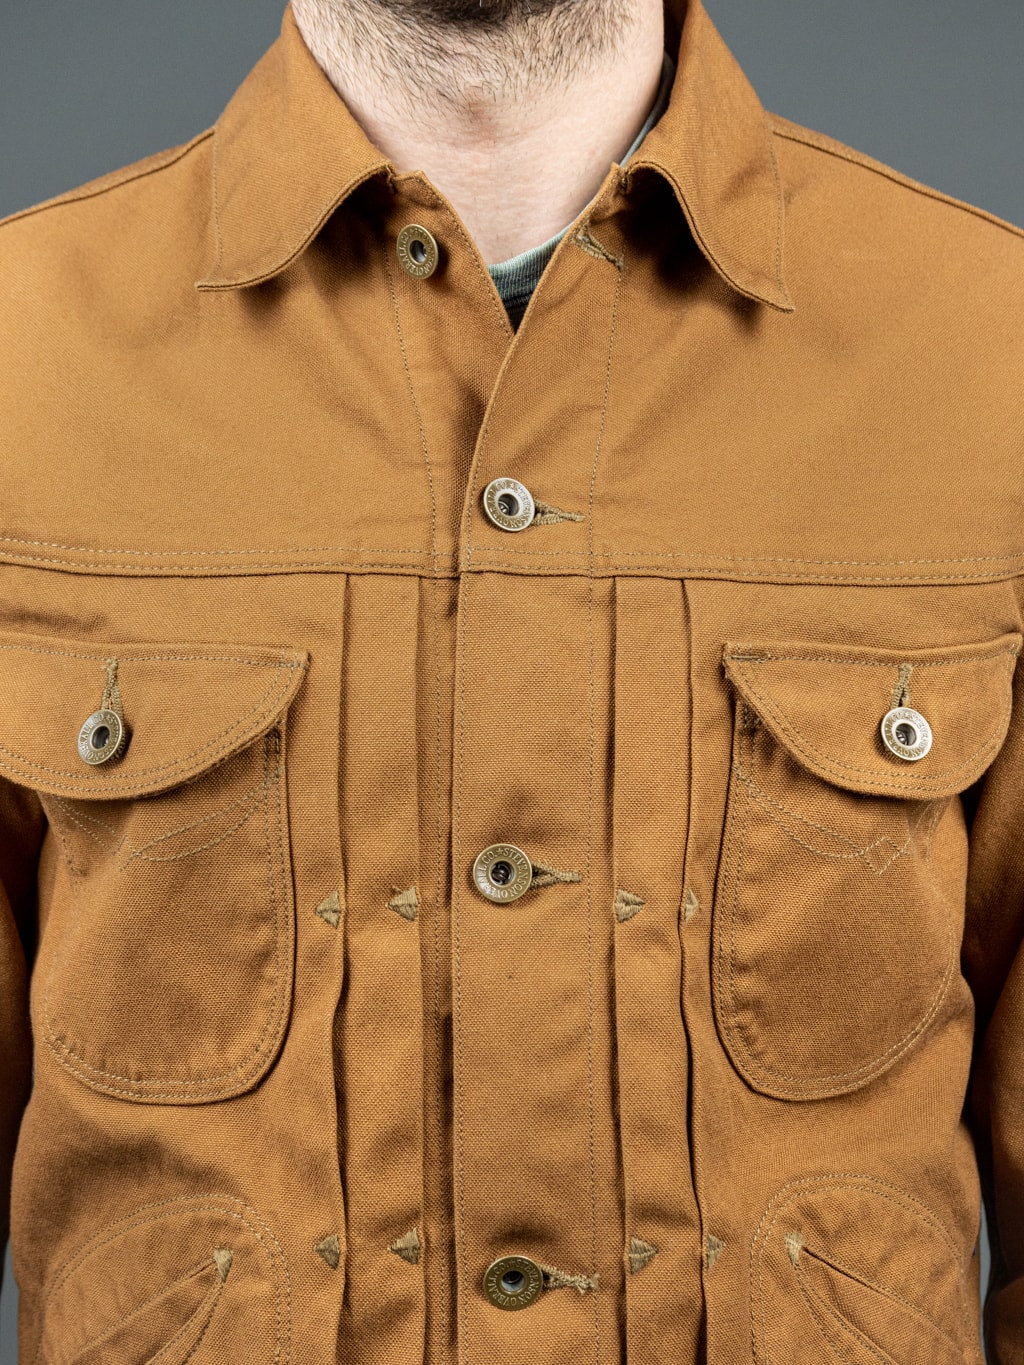 Stevenson Overall Stockman SM1 Jacket Brown western style pockets